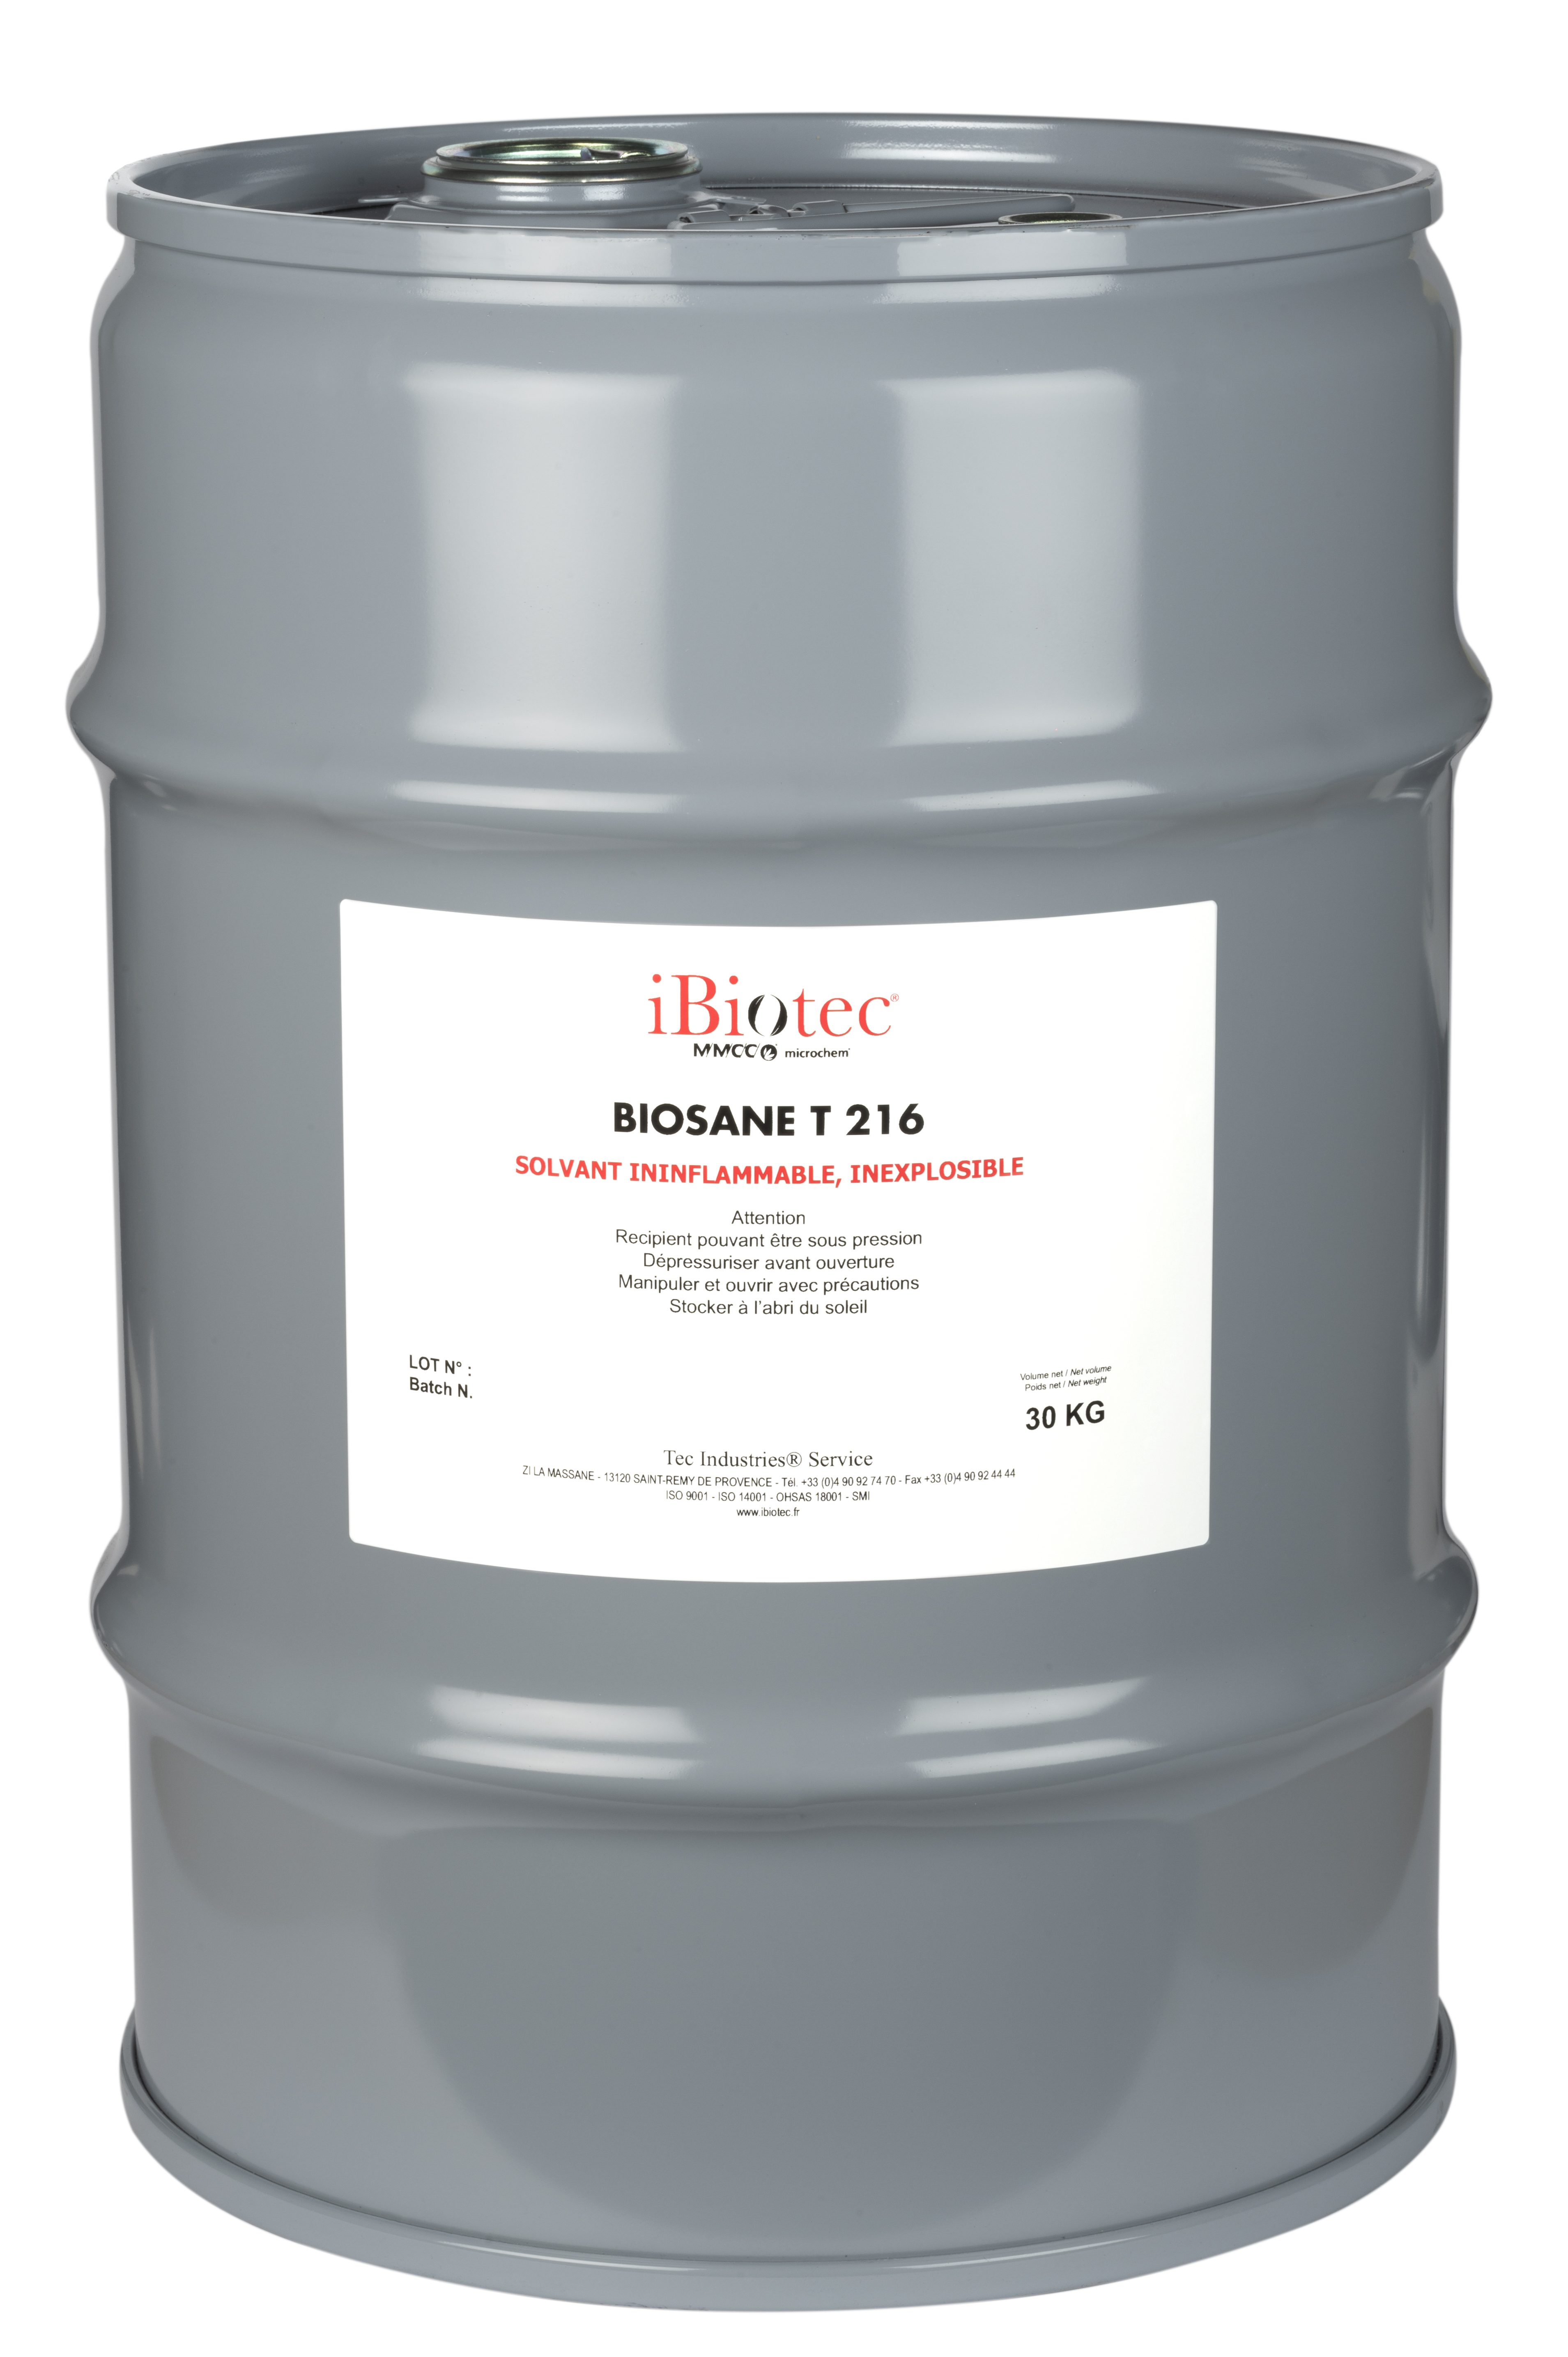 Non-flammable solvent for washing, cleaning and degreasing, HFC and HCFC substitute. Non-flammable solvent  